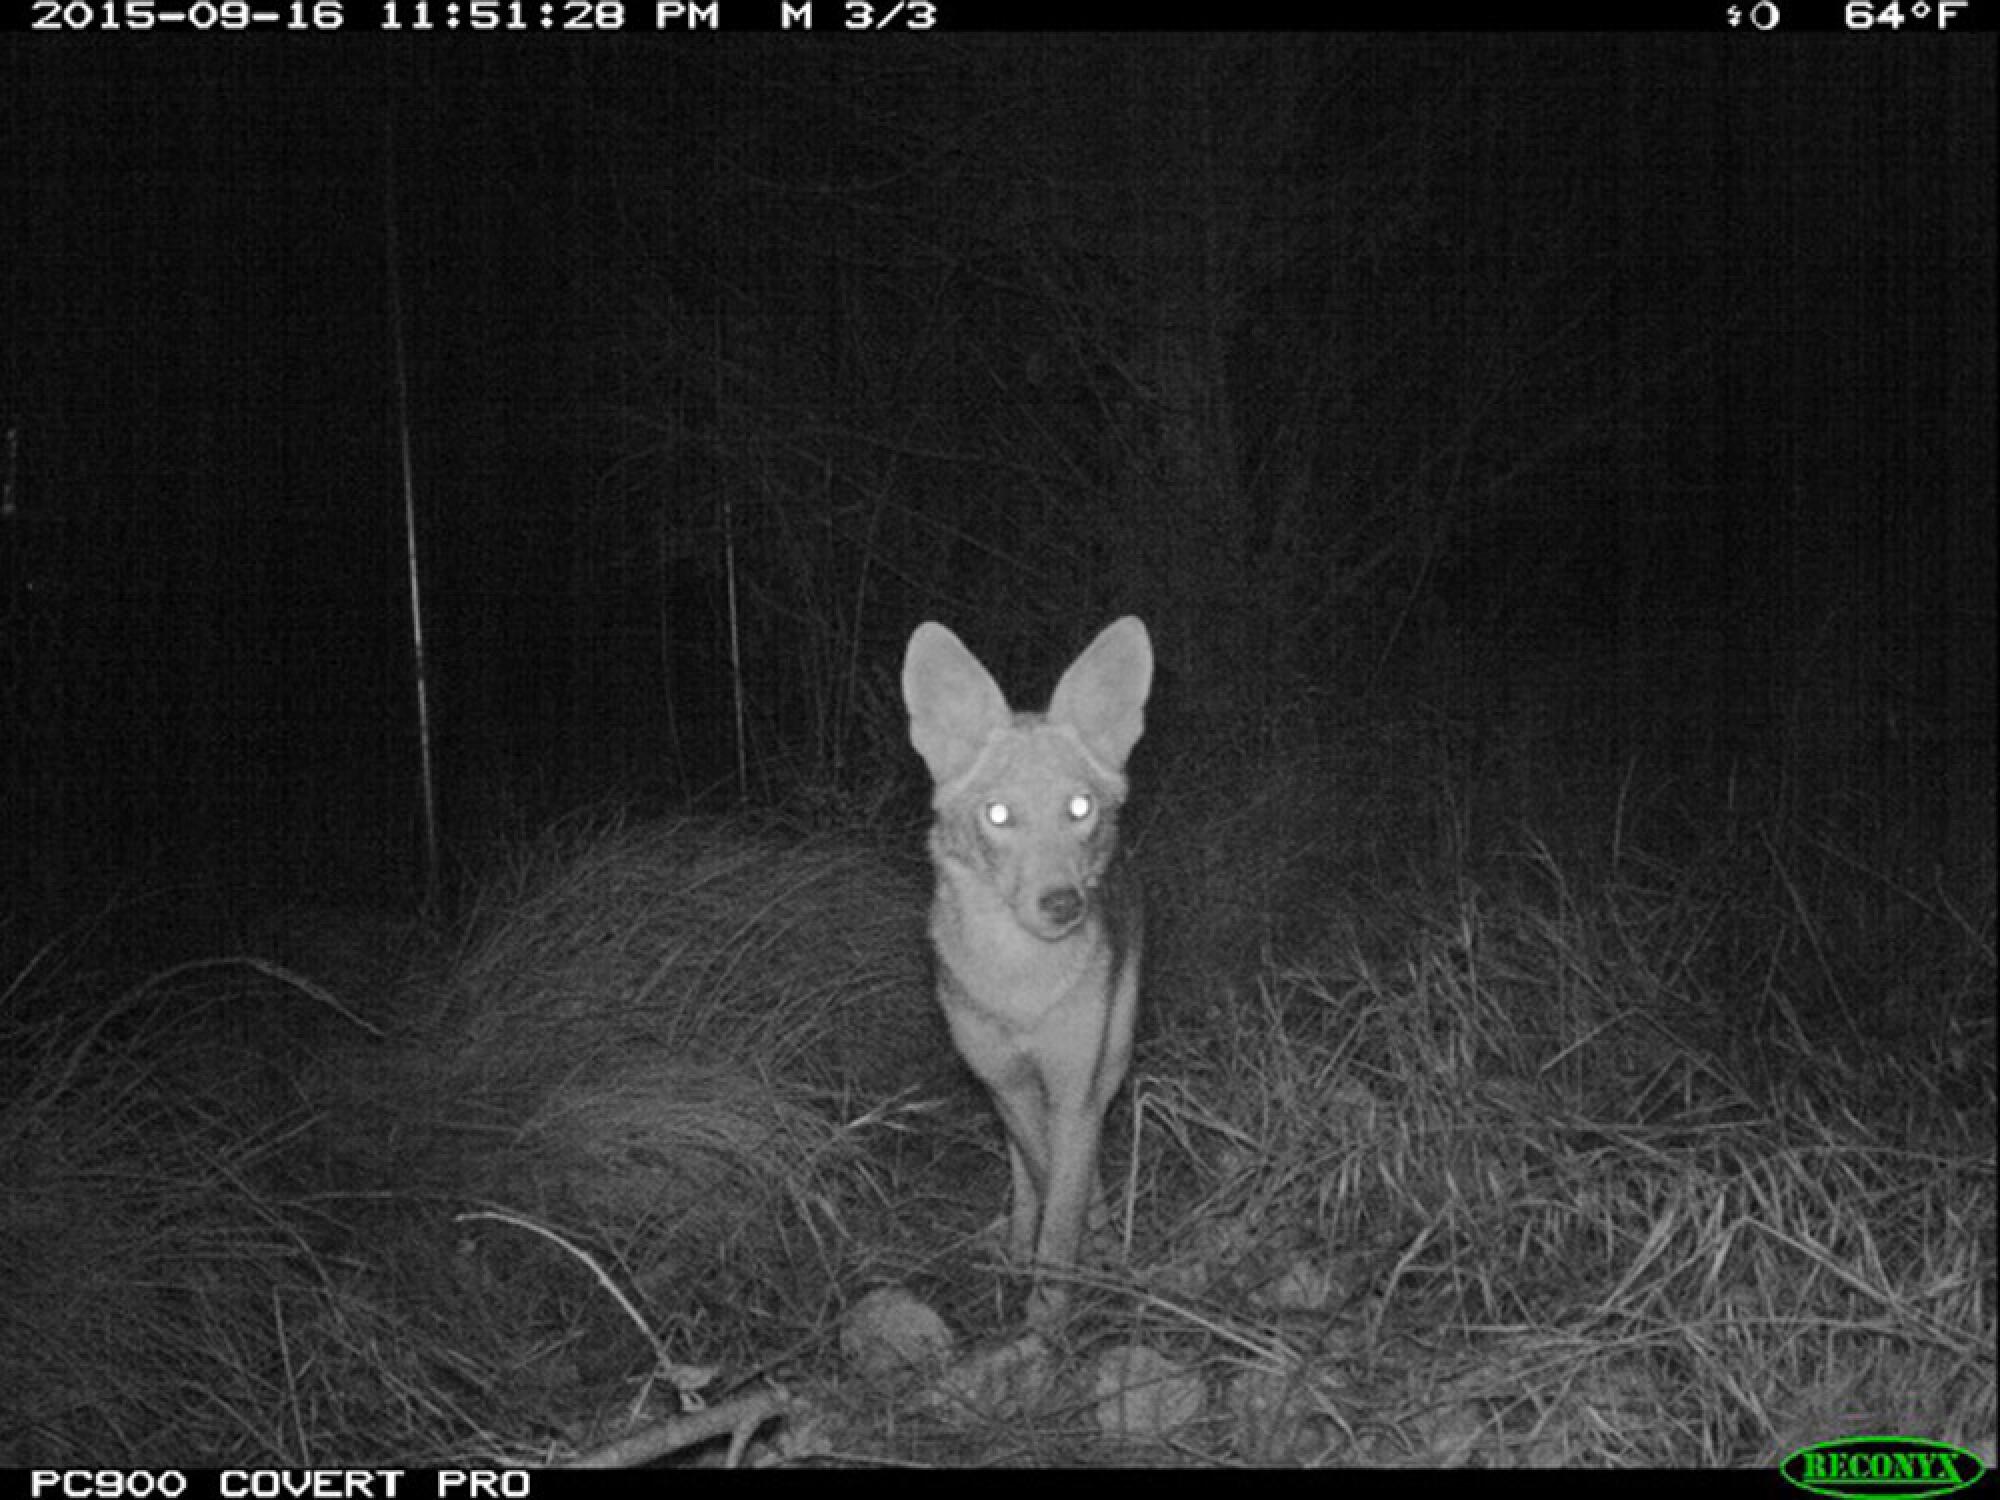 A coyote's eyes glow in a nighttime image